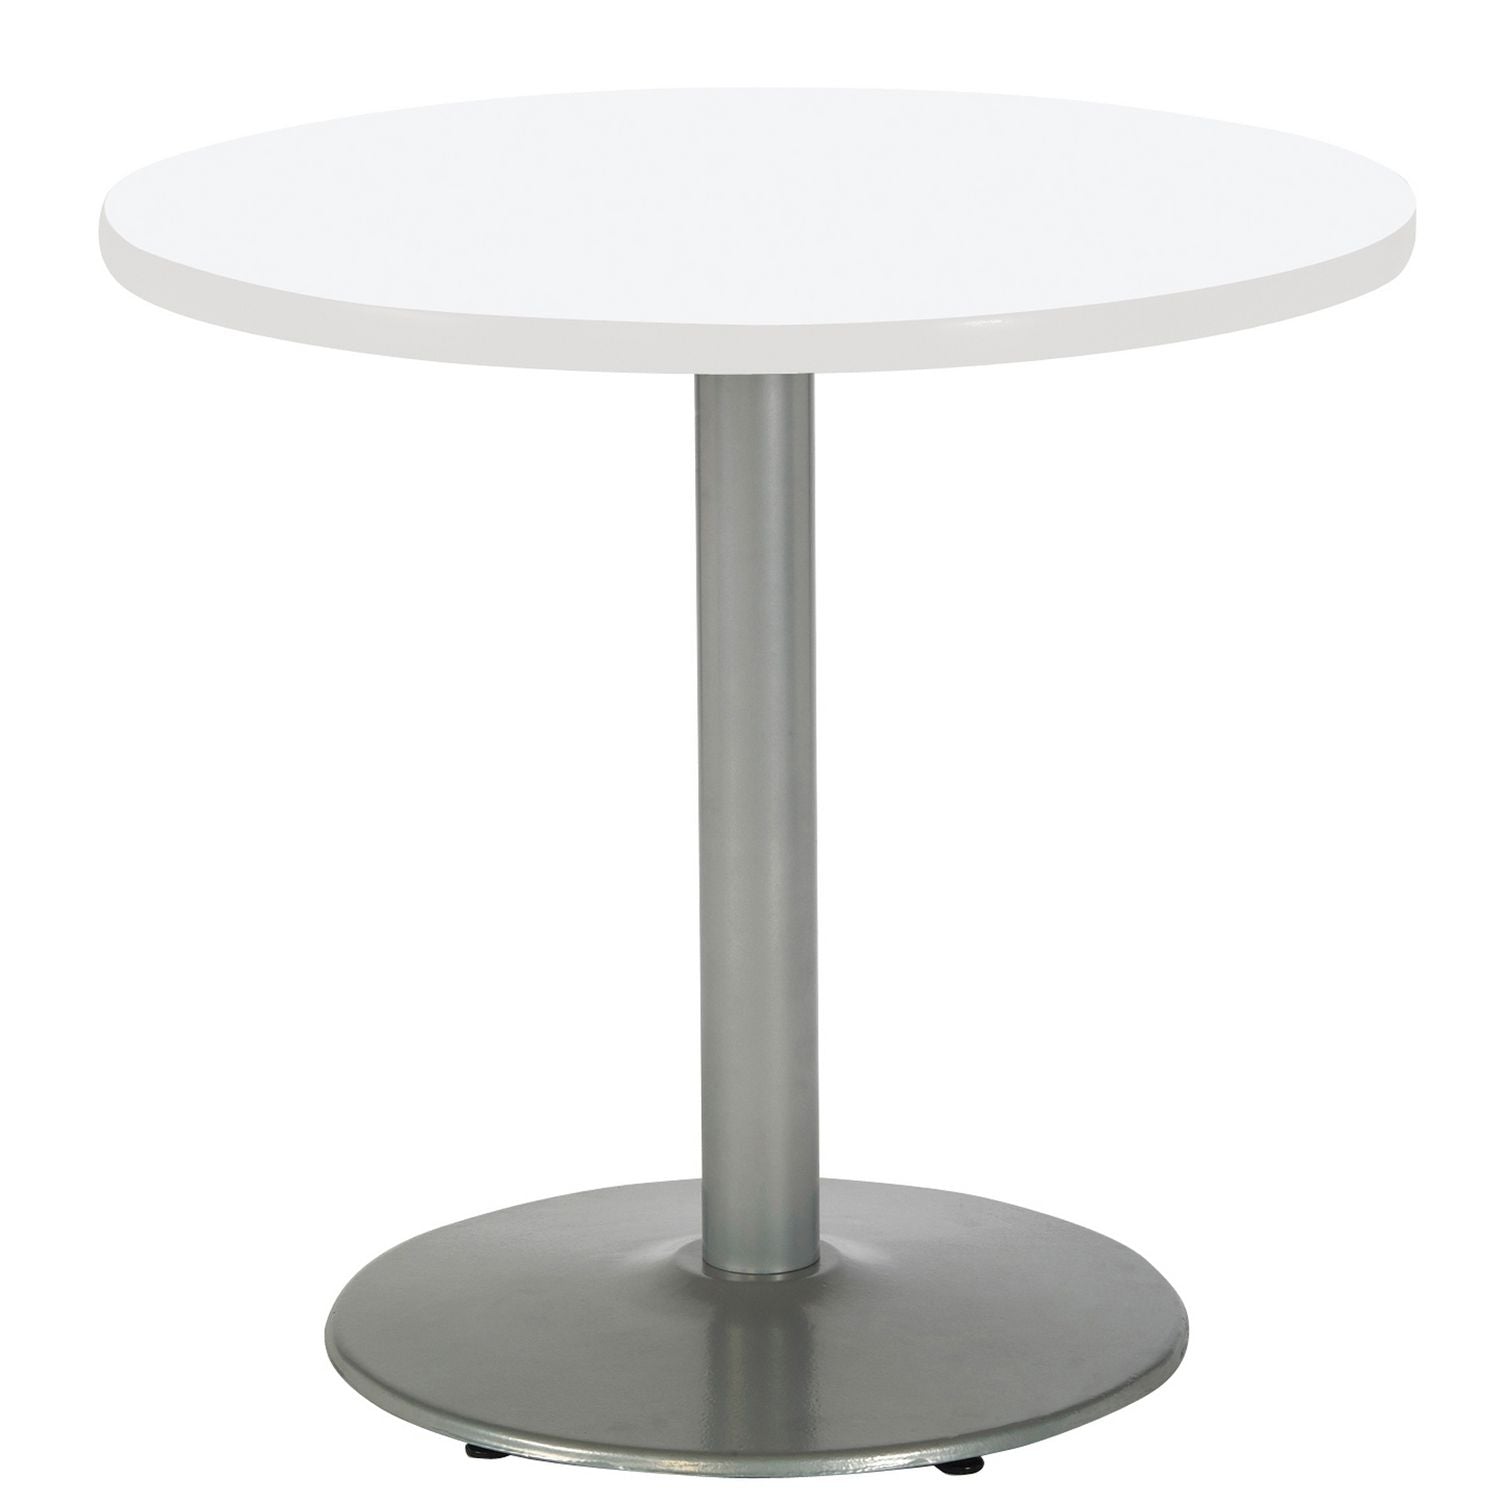 pedestal-table-with-four-sky-blue-kool-series-chairs-round-36-dia-x-29h-designer-white-ships-in-4-6-business-days_kfi811774036757 - 2